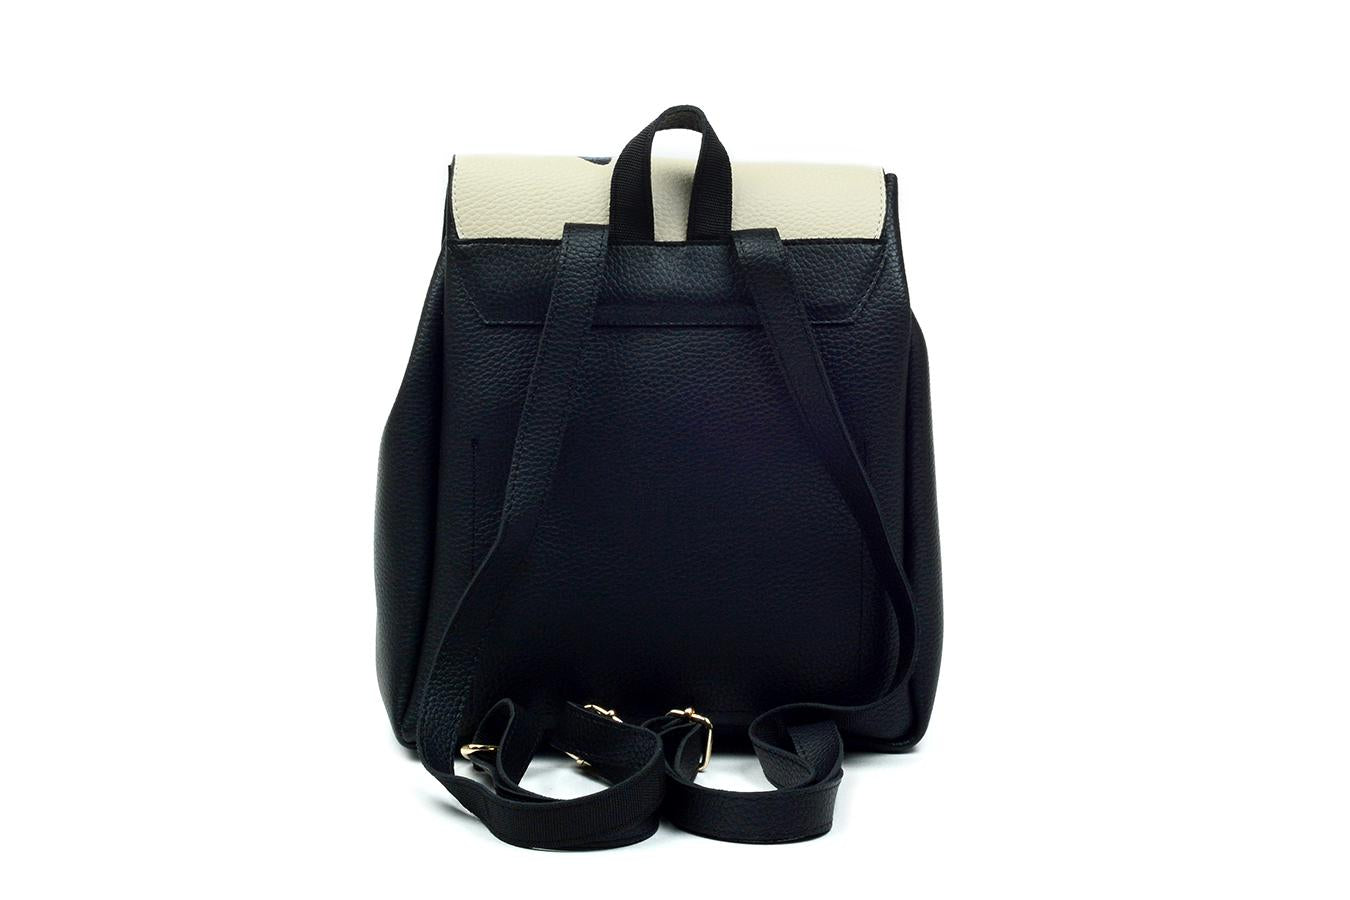 Backpack CAN1109